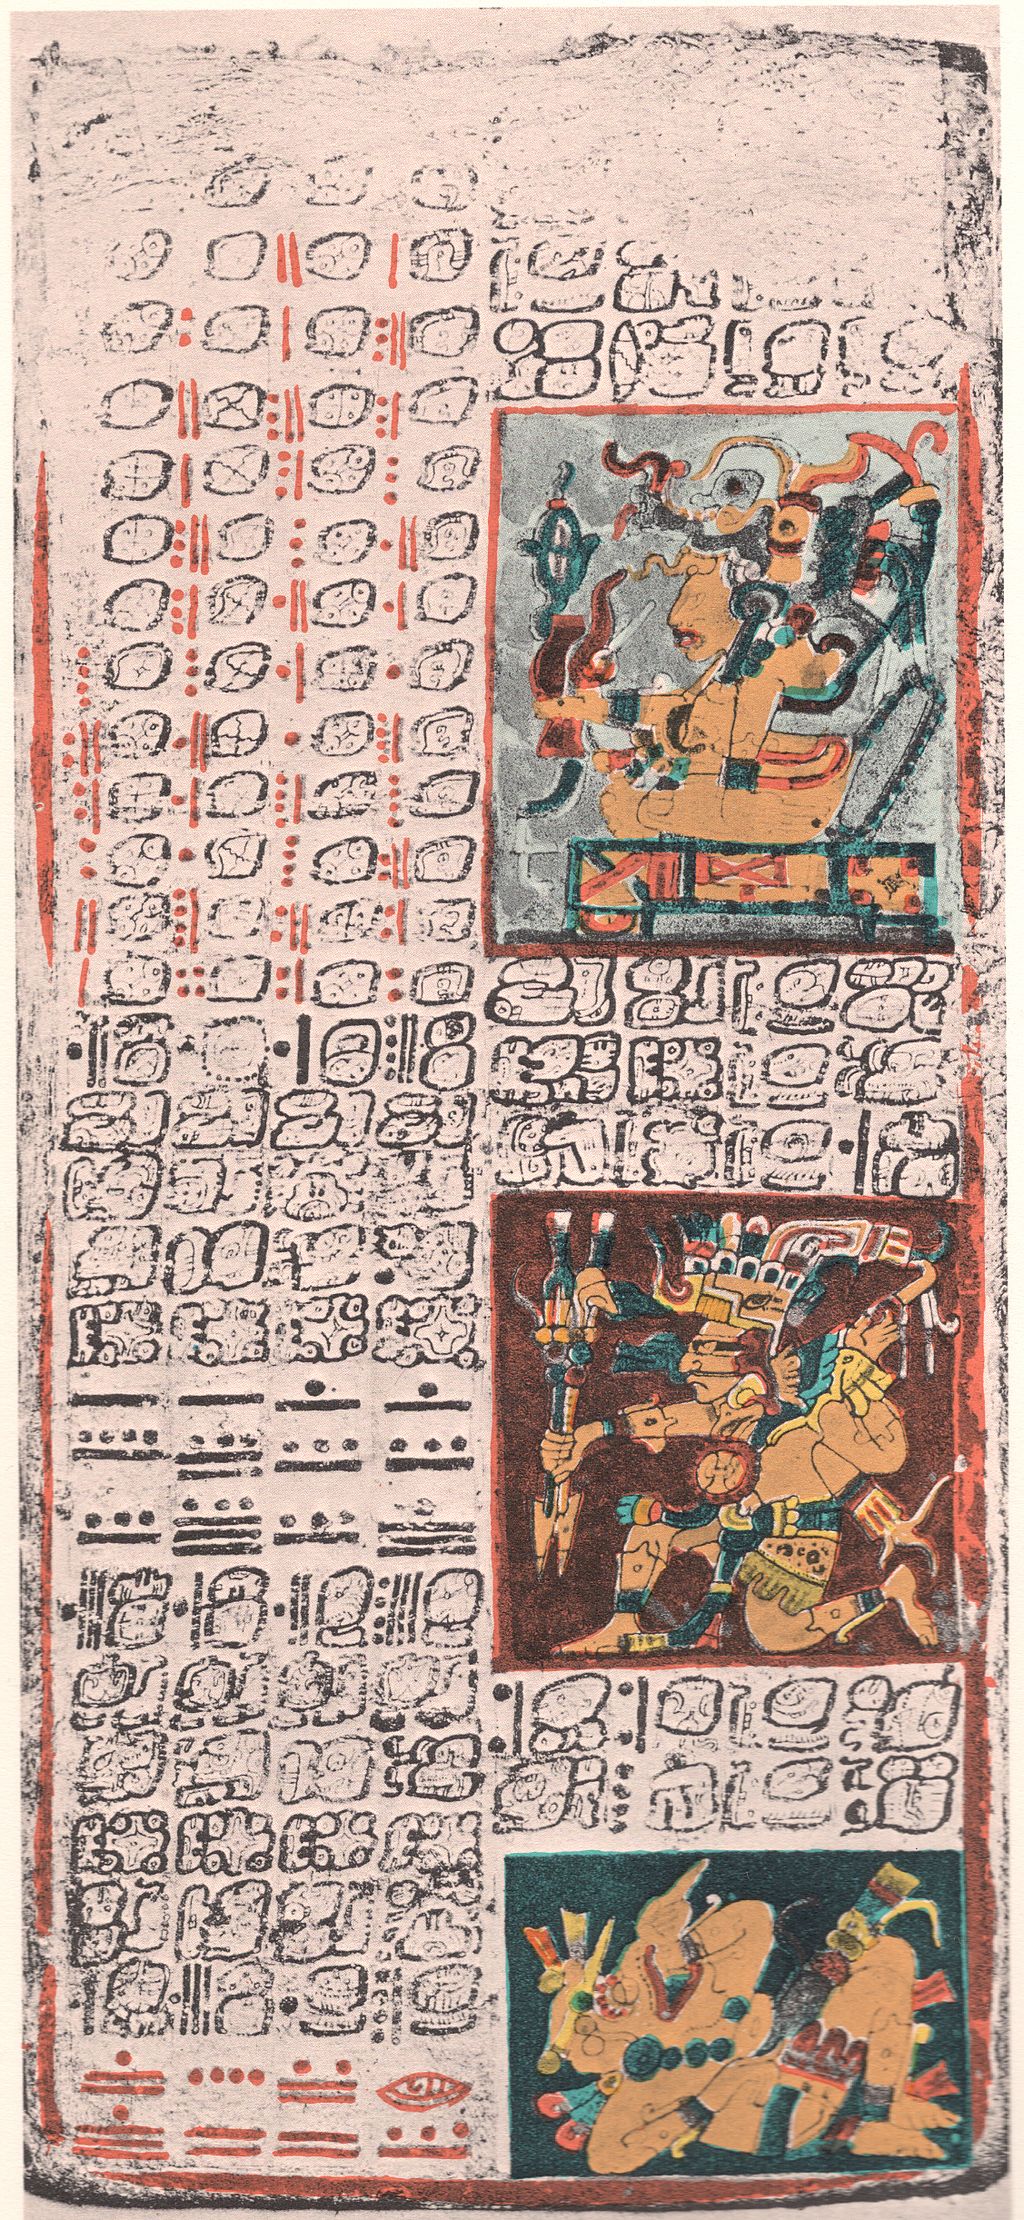 A faded parchment with rows of symbols and three coloured drawings depicting people.